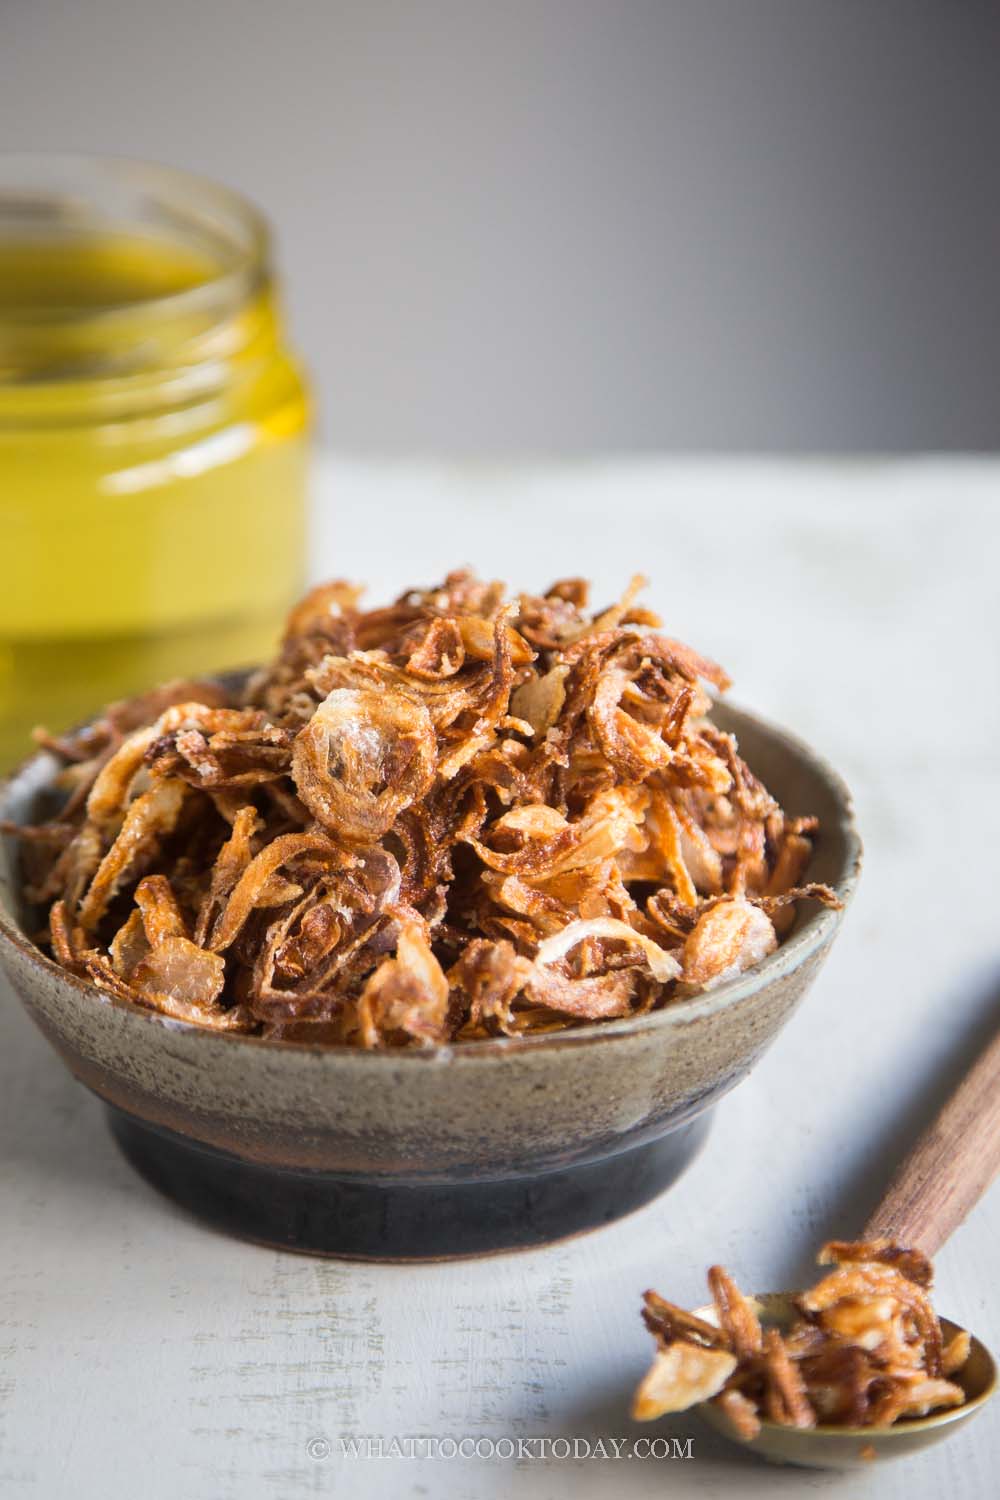 How To Make Asian Crispy Fried Shallots (Bawang Goreng) and Shallot Infused Oil